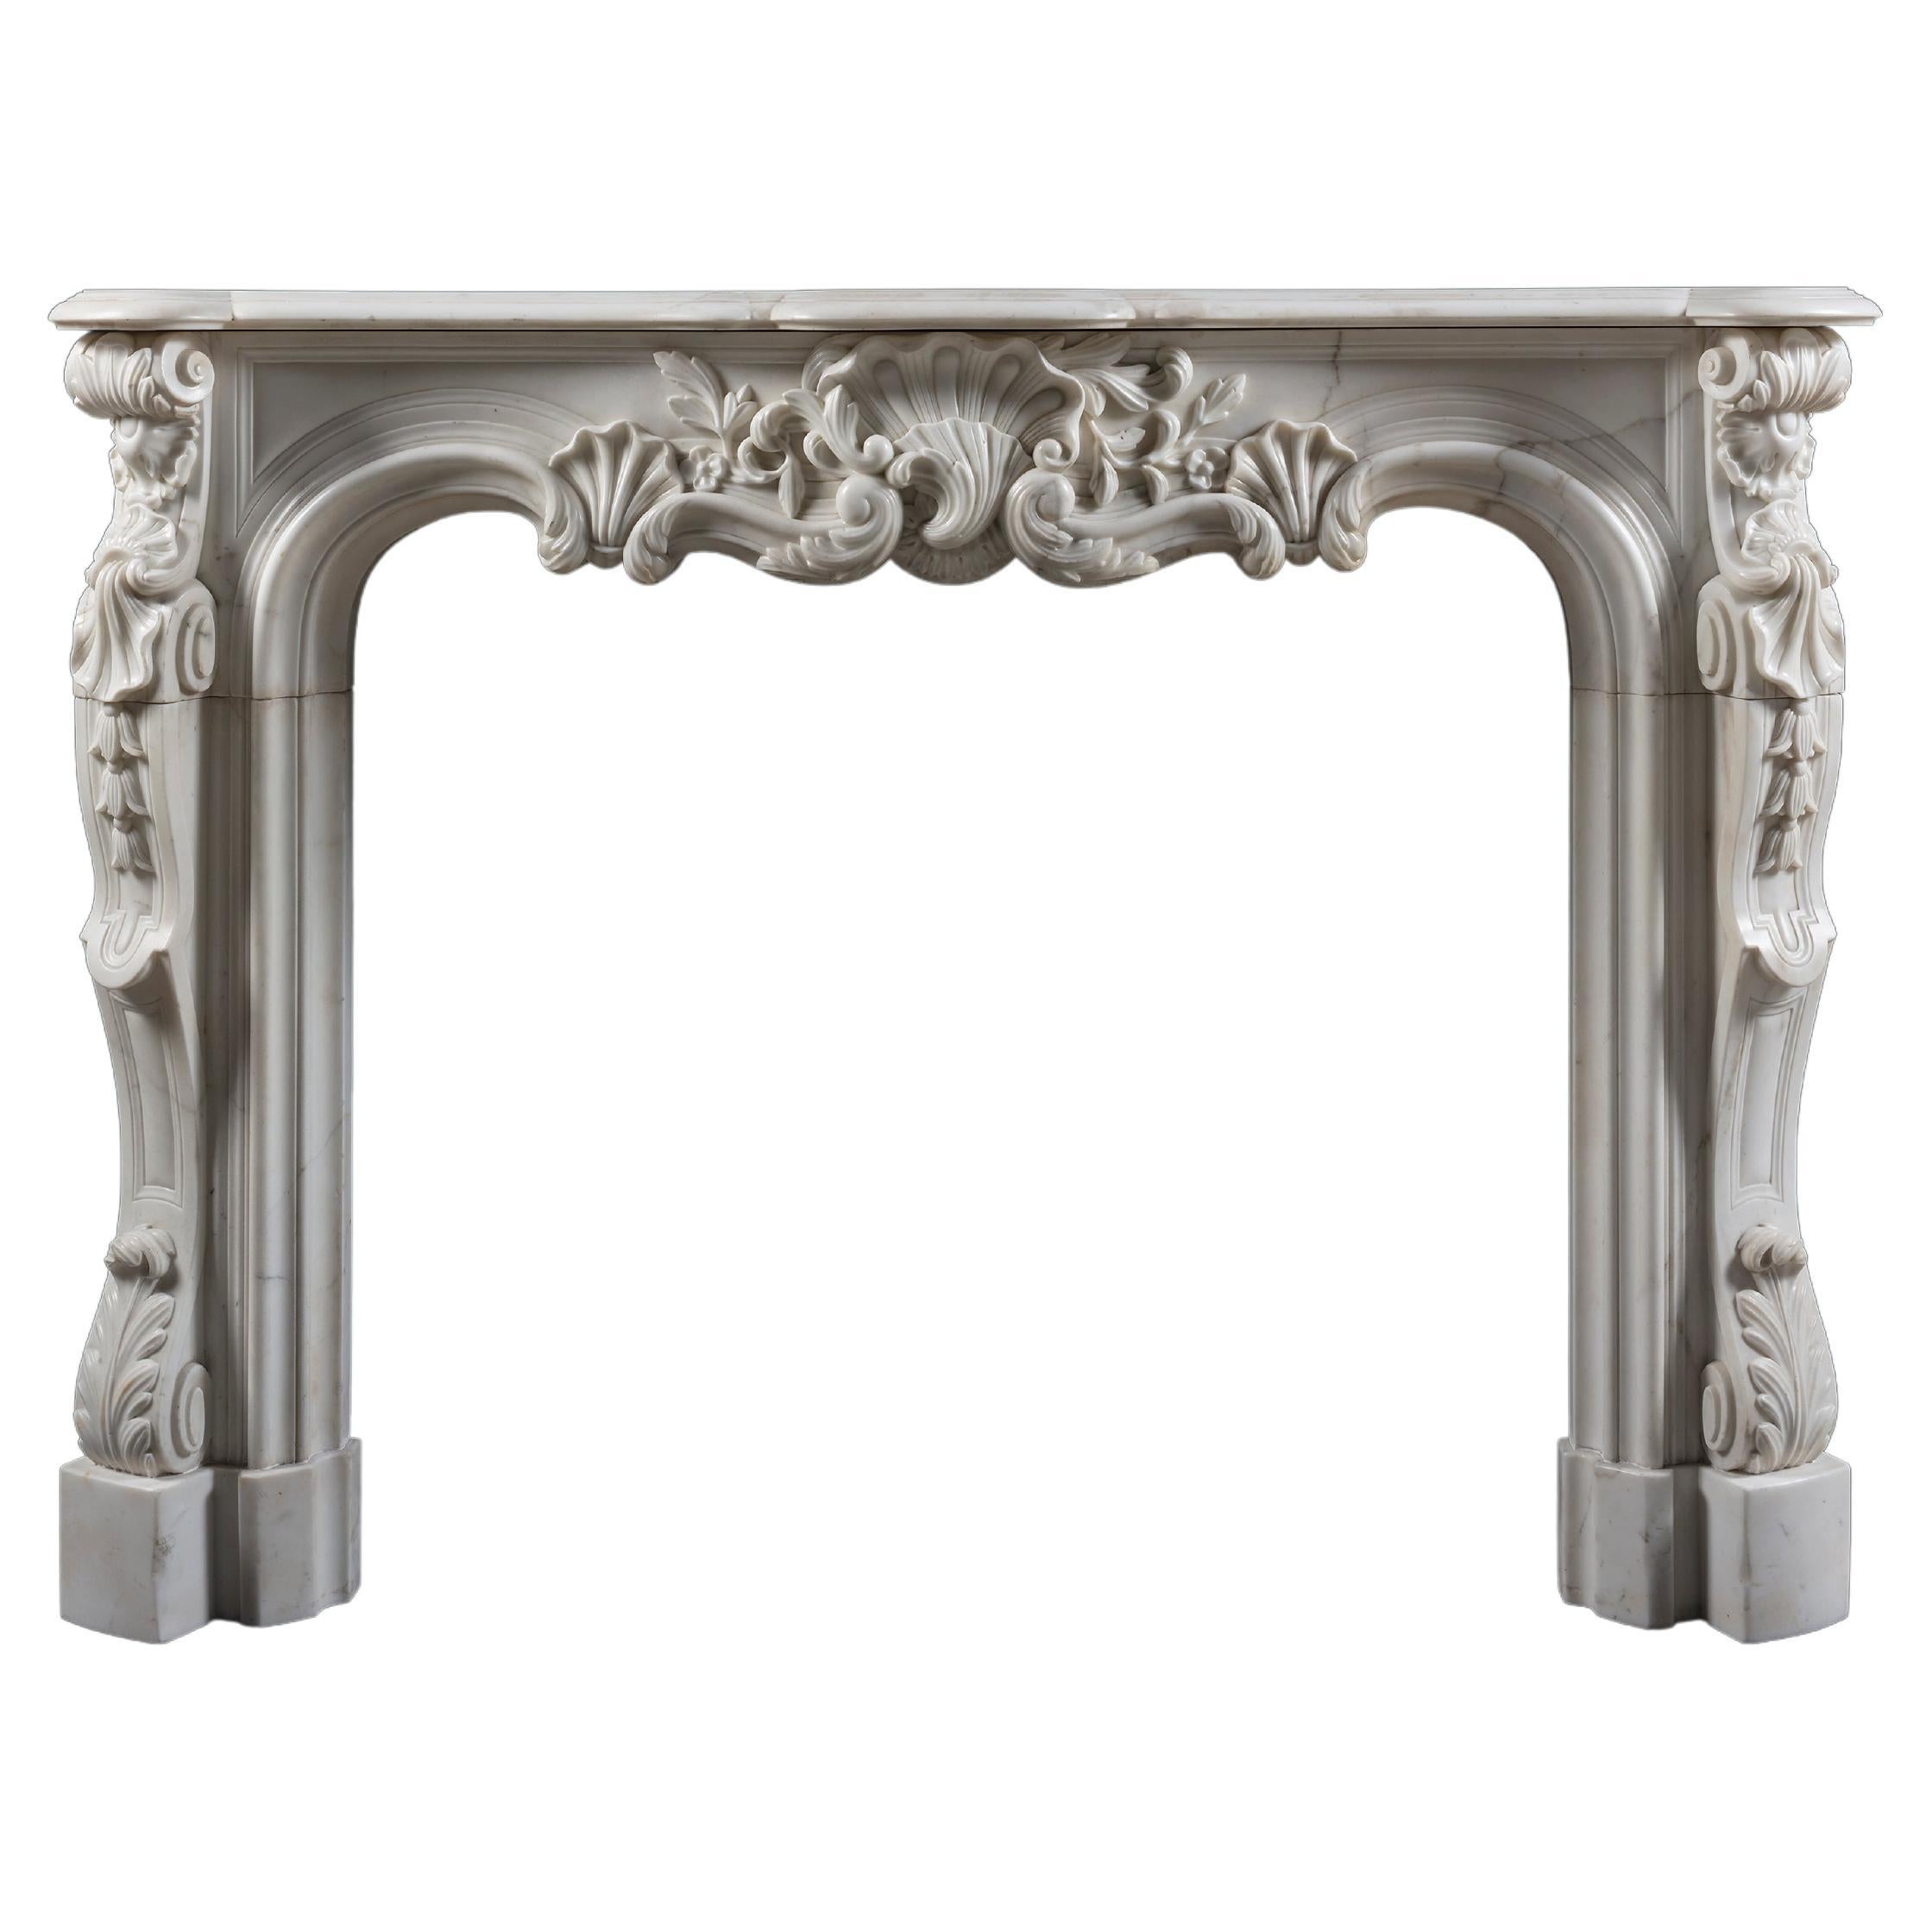 A 19th Century Rococo Chimneypiece in Louis XV Style